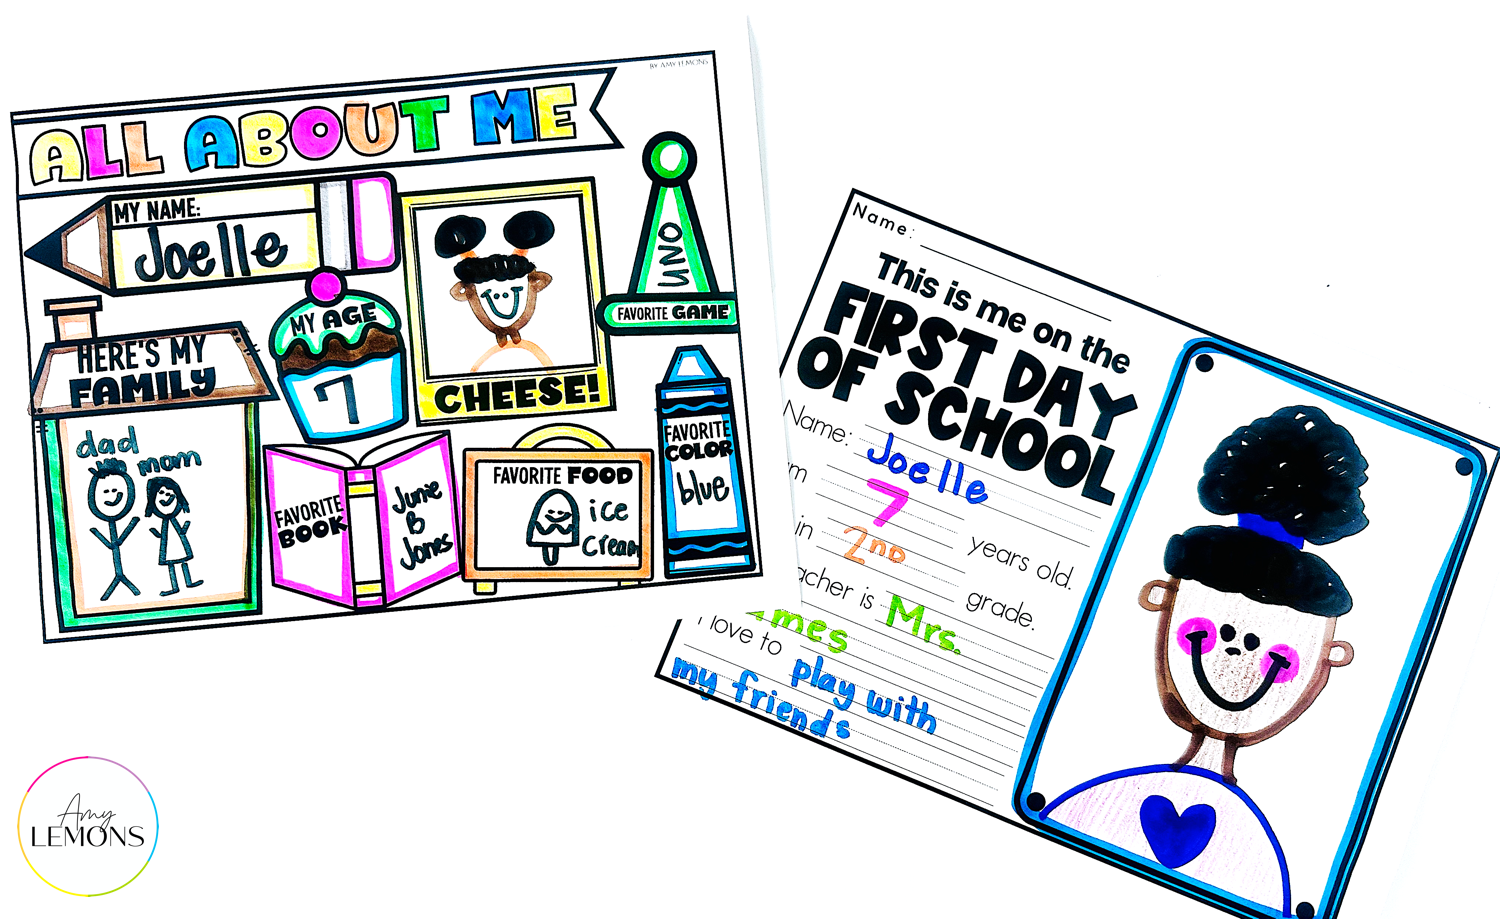 All about me printables or worksheets for the first day of school.